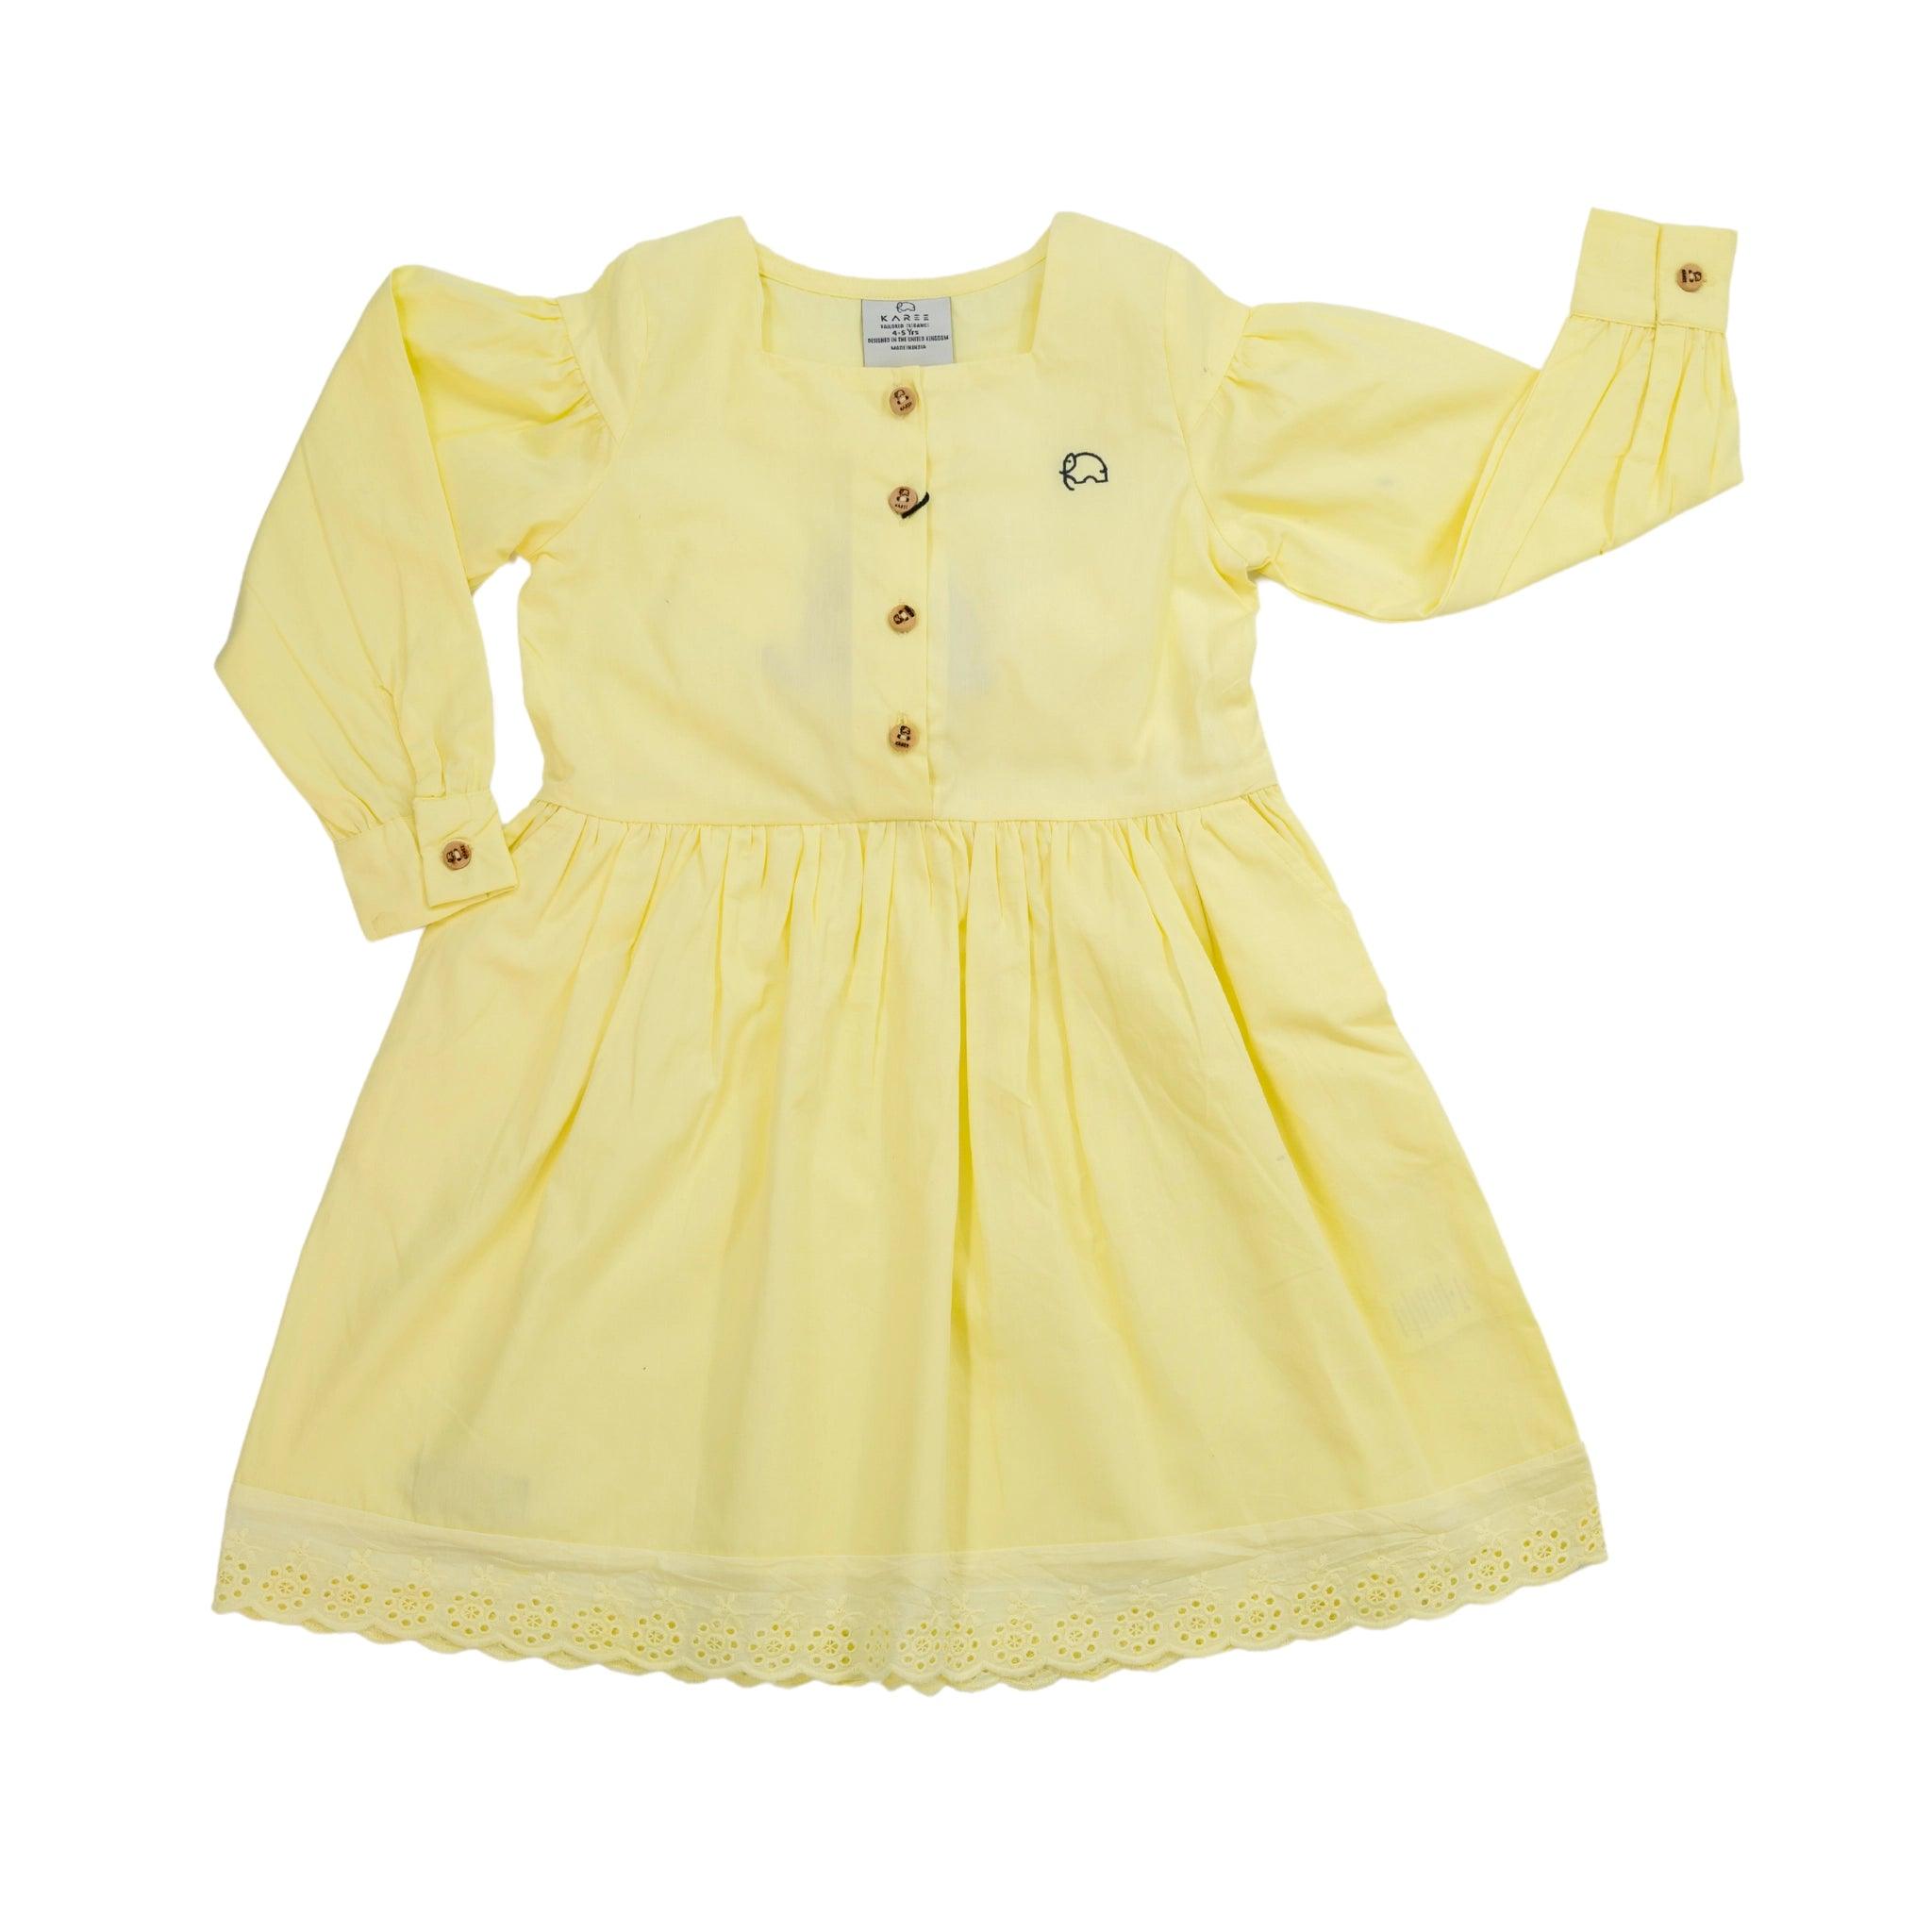 Yellow Karee children's cotton dress with long puff sleeves, button details, and lace trim, displayed on a white background.